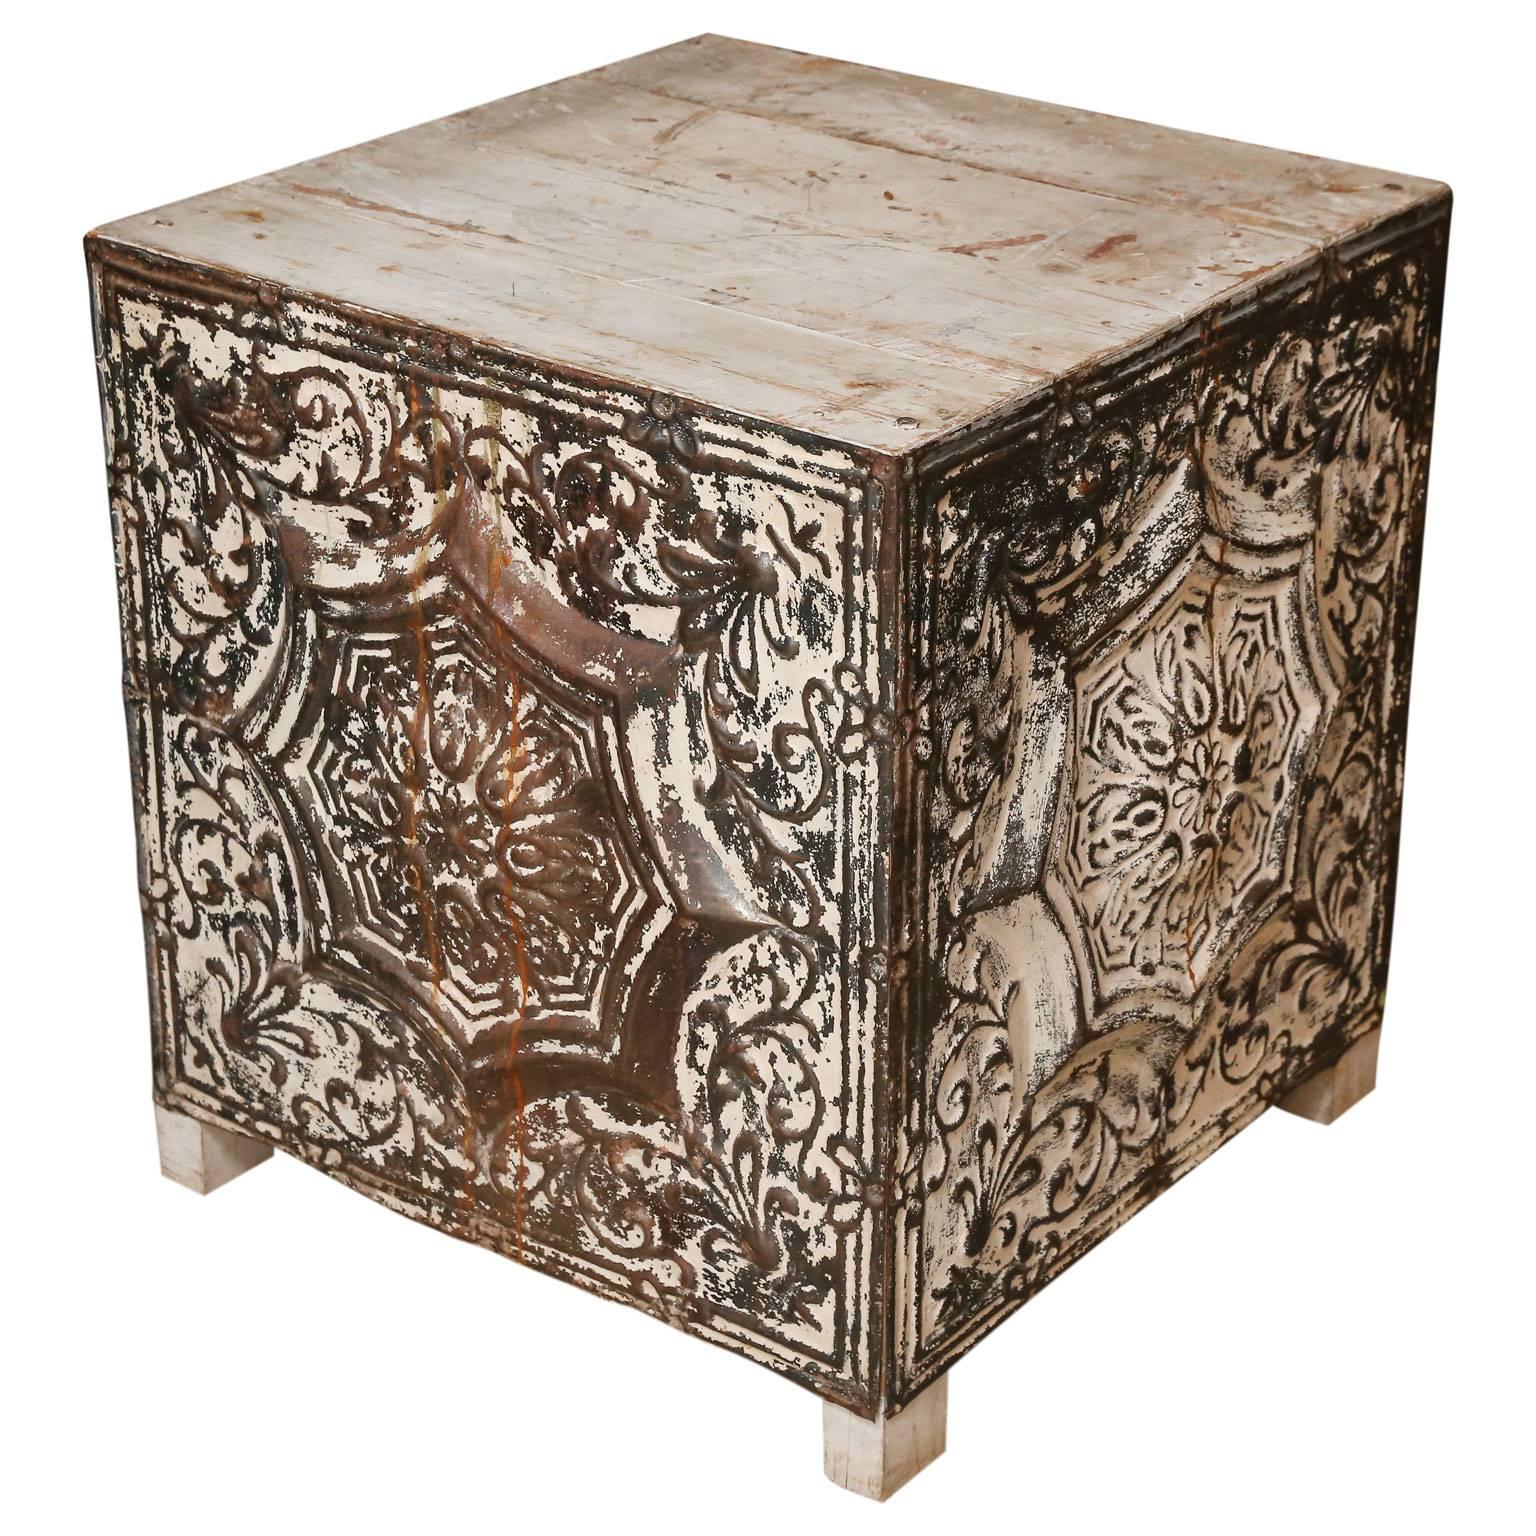 Hand-Painted Decorative Metal and Wood Cube-Shape Table